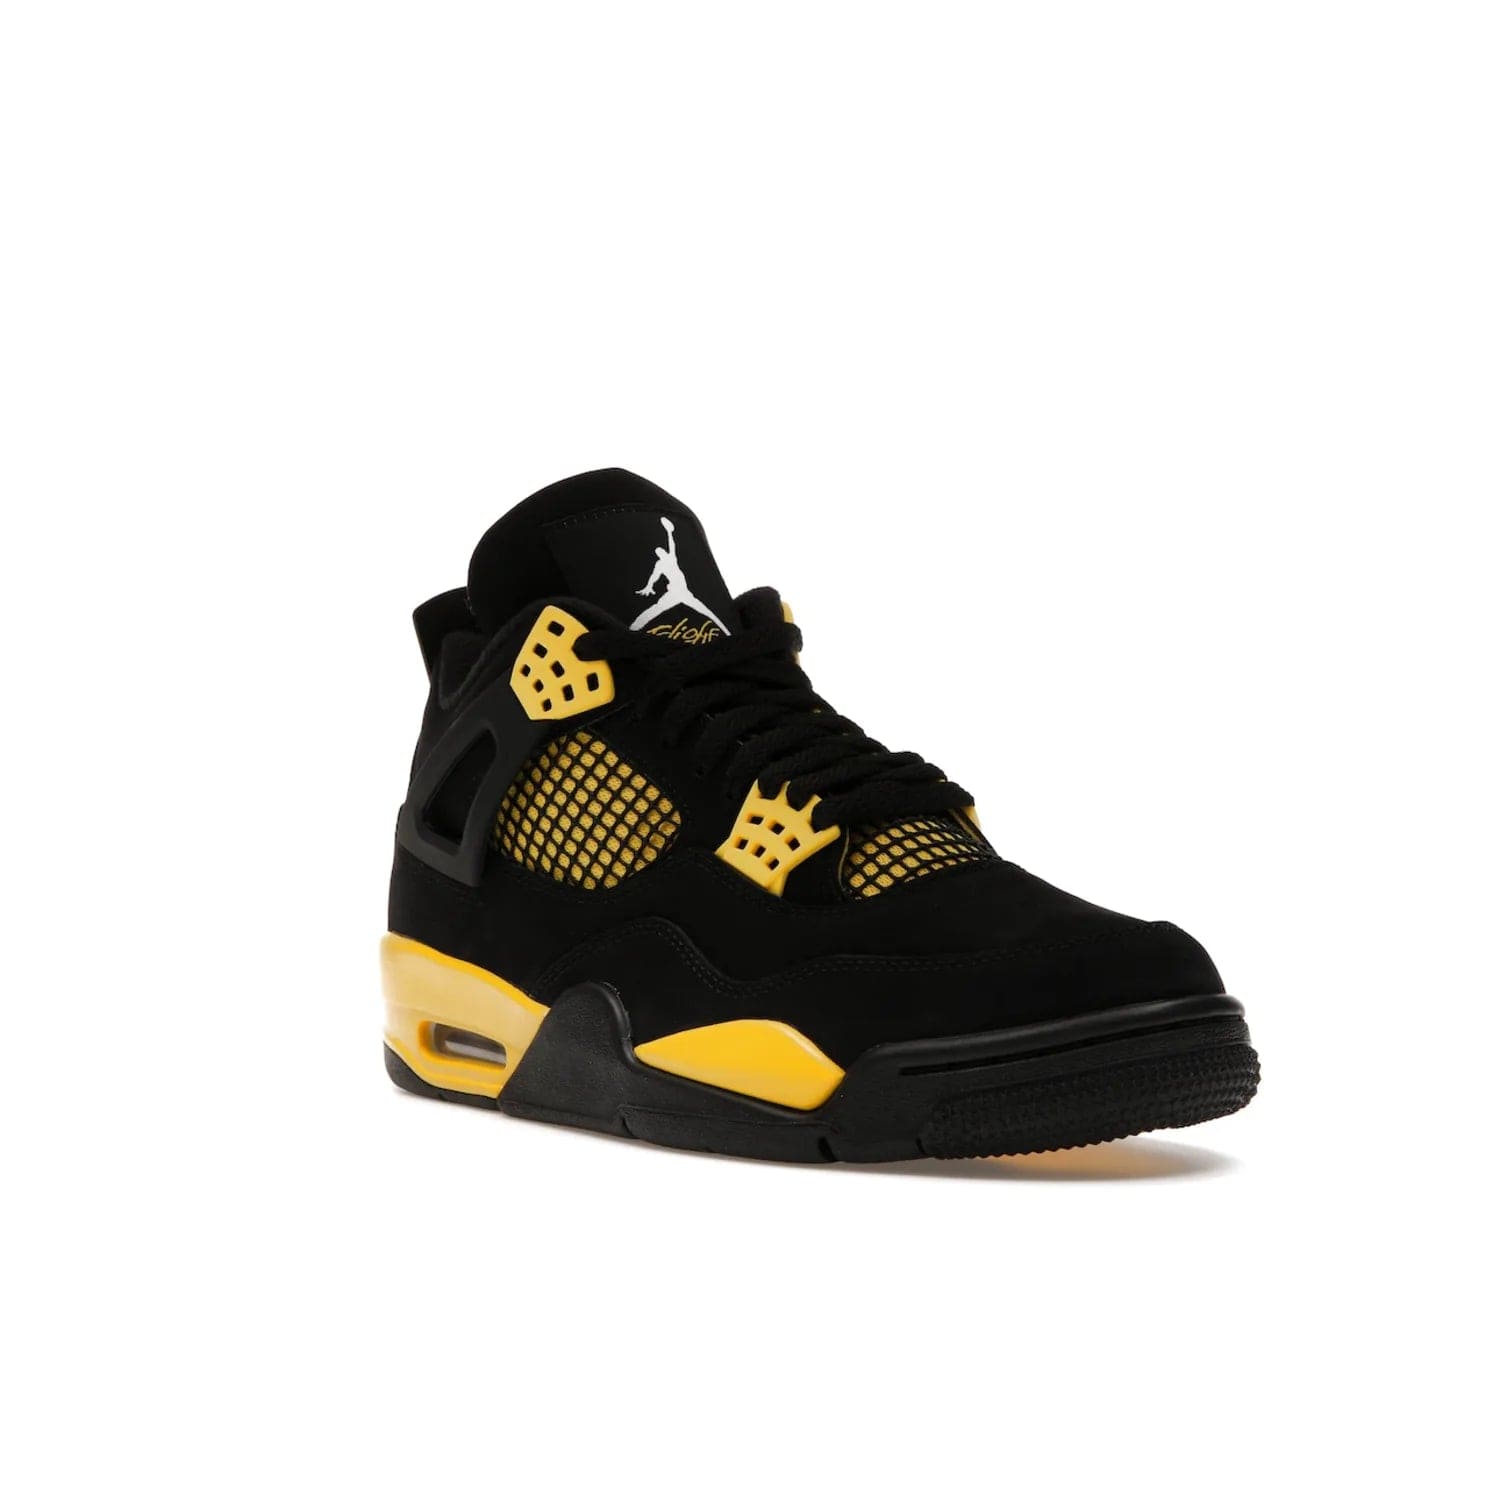 Jordan 4 Retro Thunder (2023) - Image 6 - Only at www.BallersClubKickz.com - Iconic Air Jordan 4 Retro Thunder (2023) returns with black nubuck upper and Tour Yellow details. Featuring Jumpman logo on heel tab, tongue and insoles. Dropping May 13th, 2023.